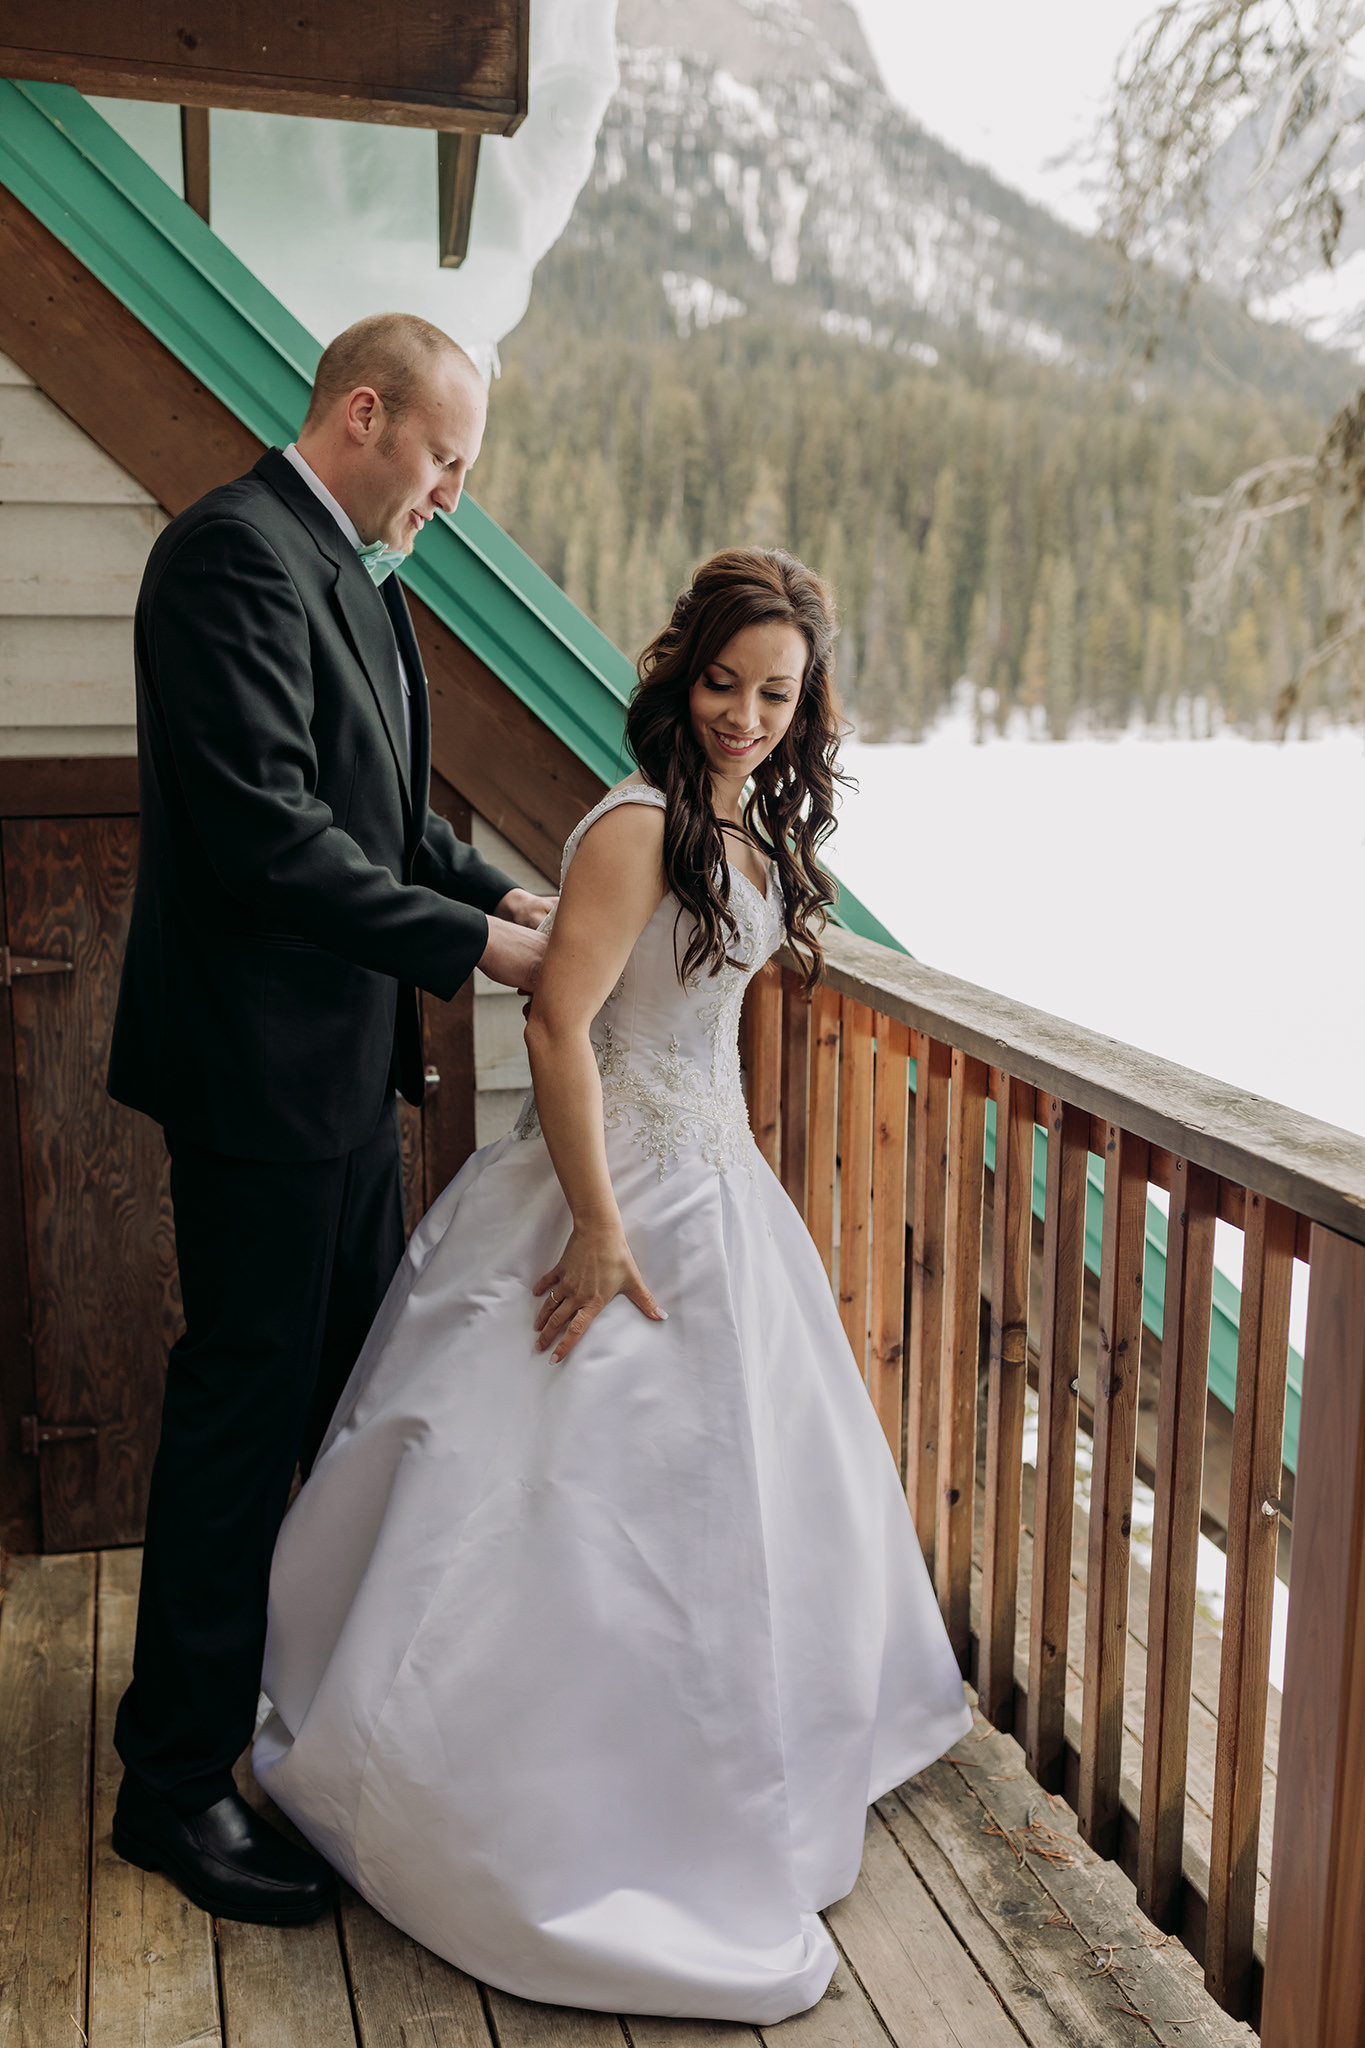 Emerald Lake Lodge elopement bride & groom getting ready together in rustic cabin for spring mountain elopement